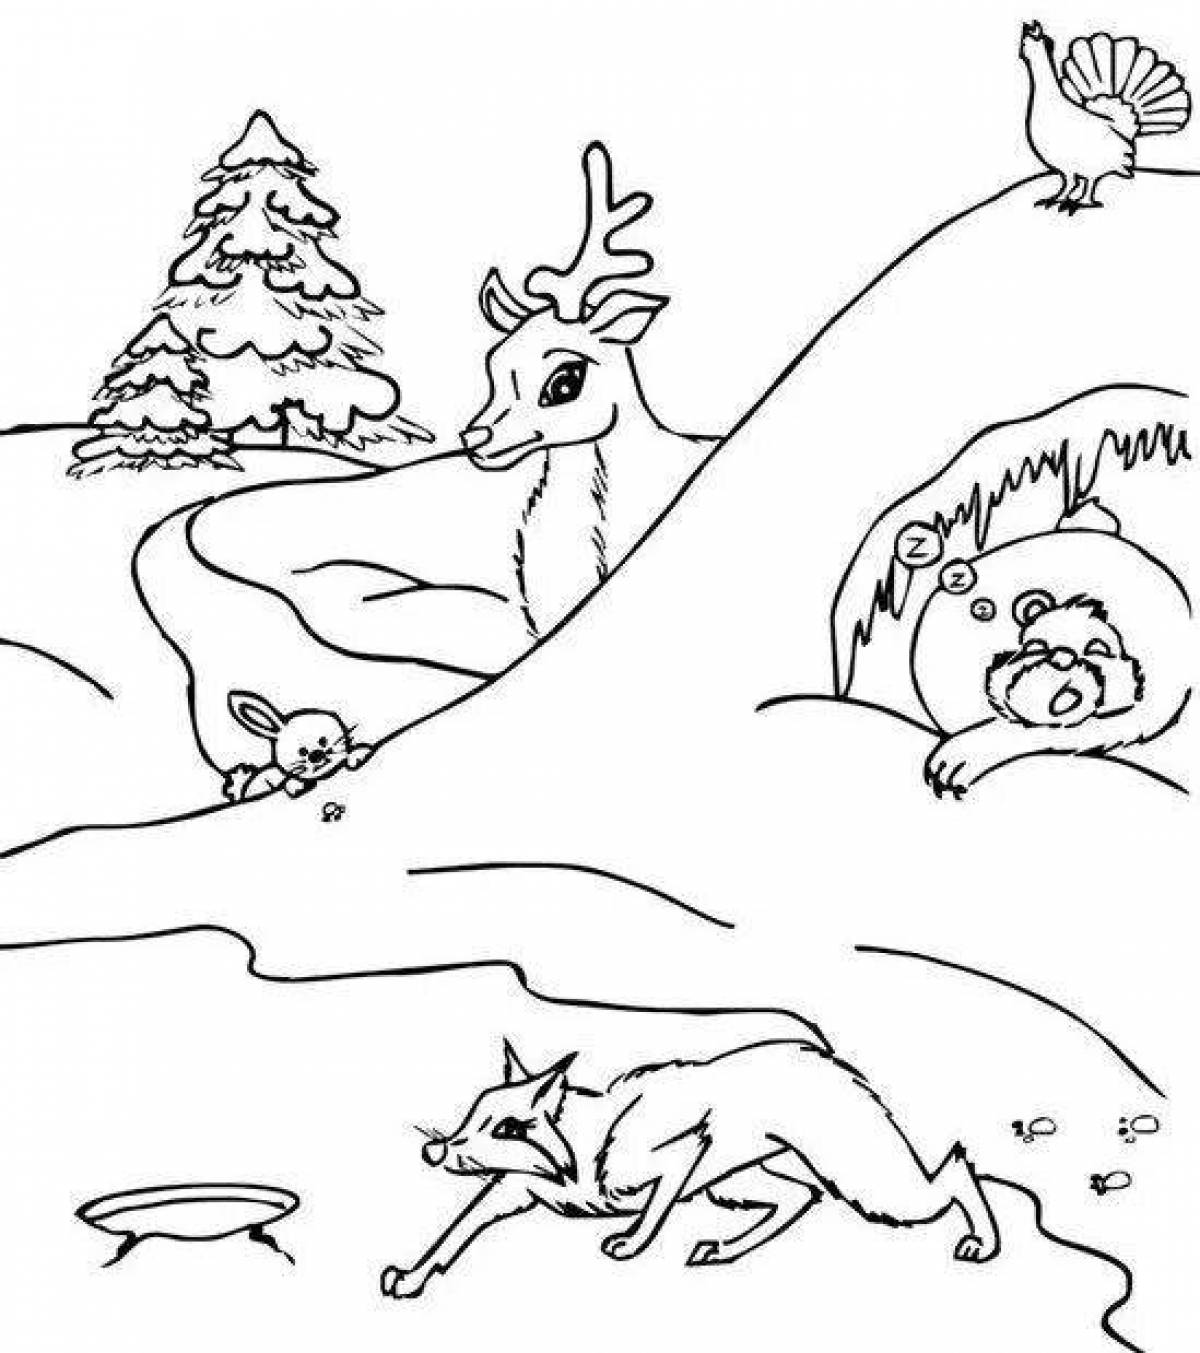 Coloring page nice family of arctic hares